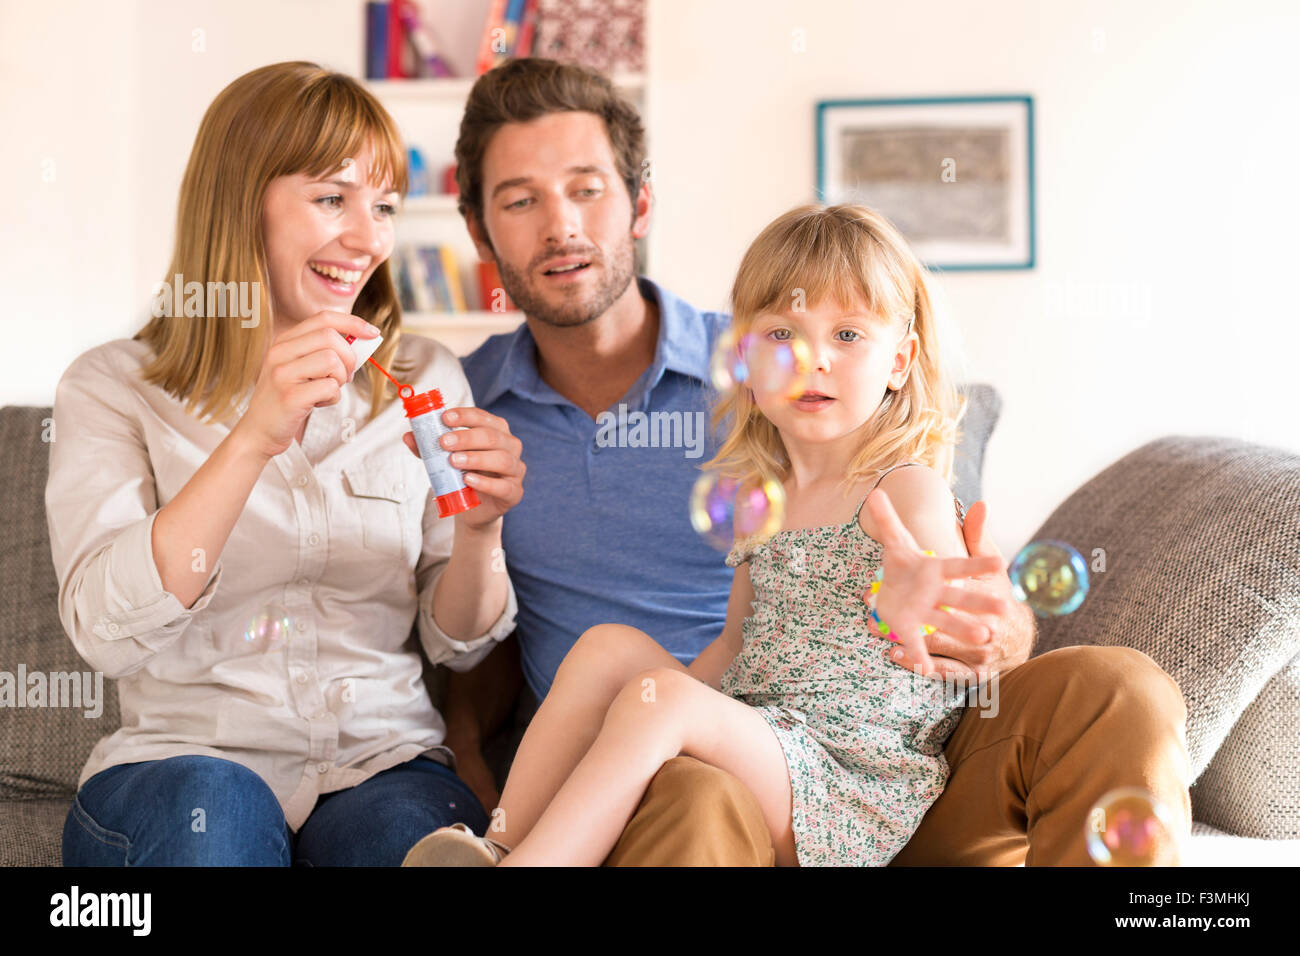 Cheerful parents and daughter blowing bubbles on sofa at home Stock Photo